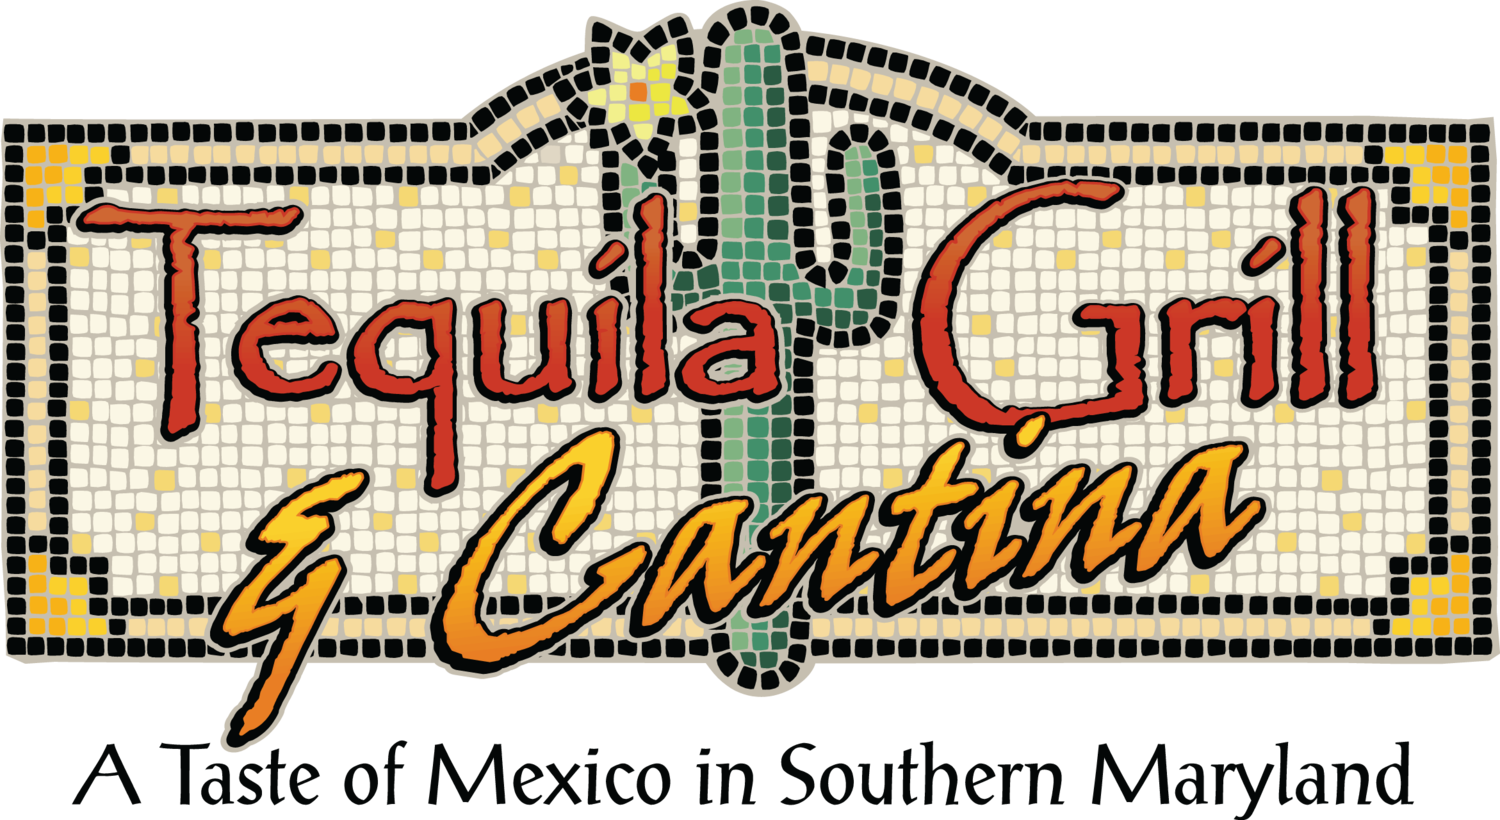 Tequila Grill &amp; Cantina